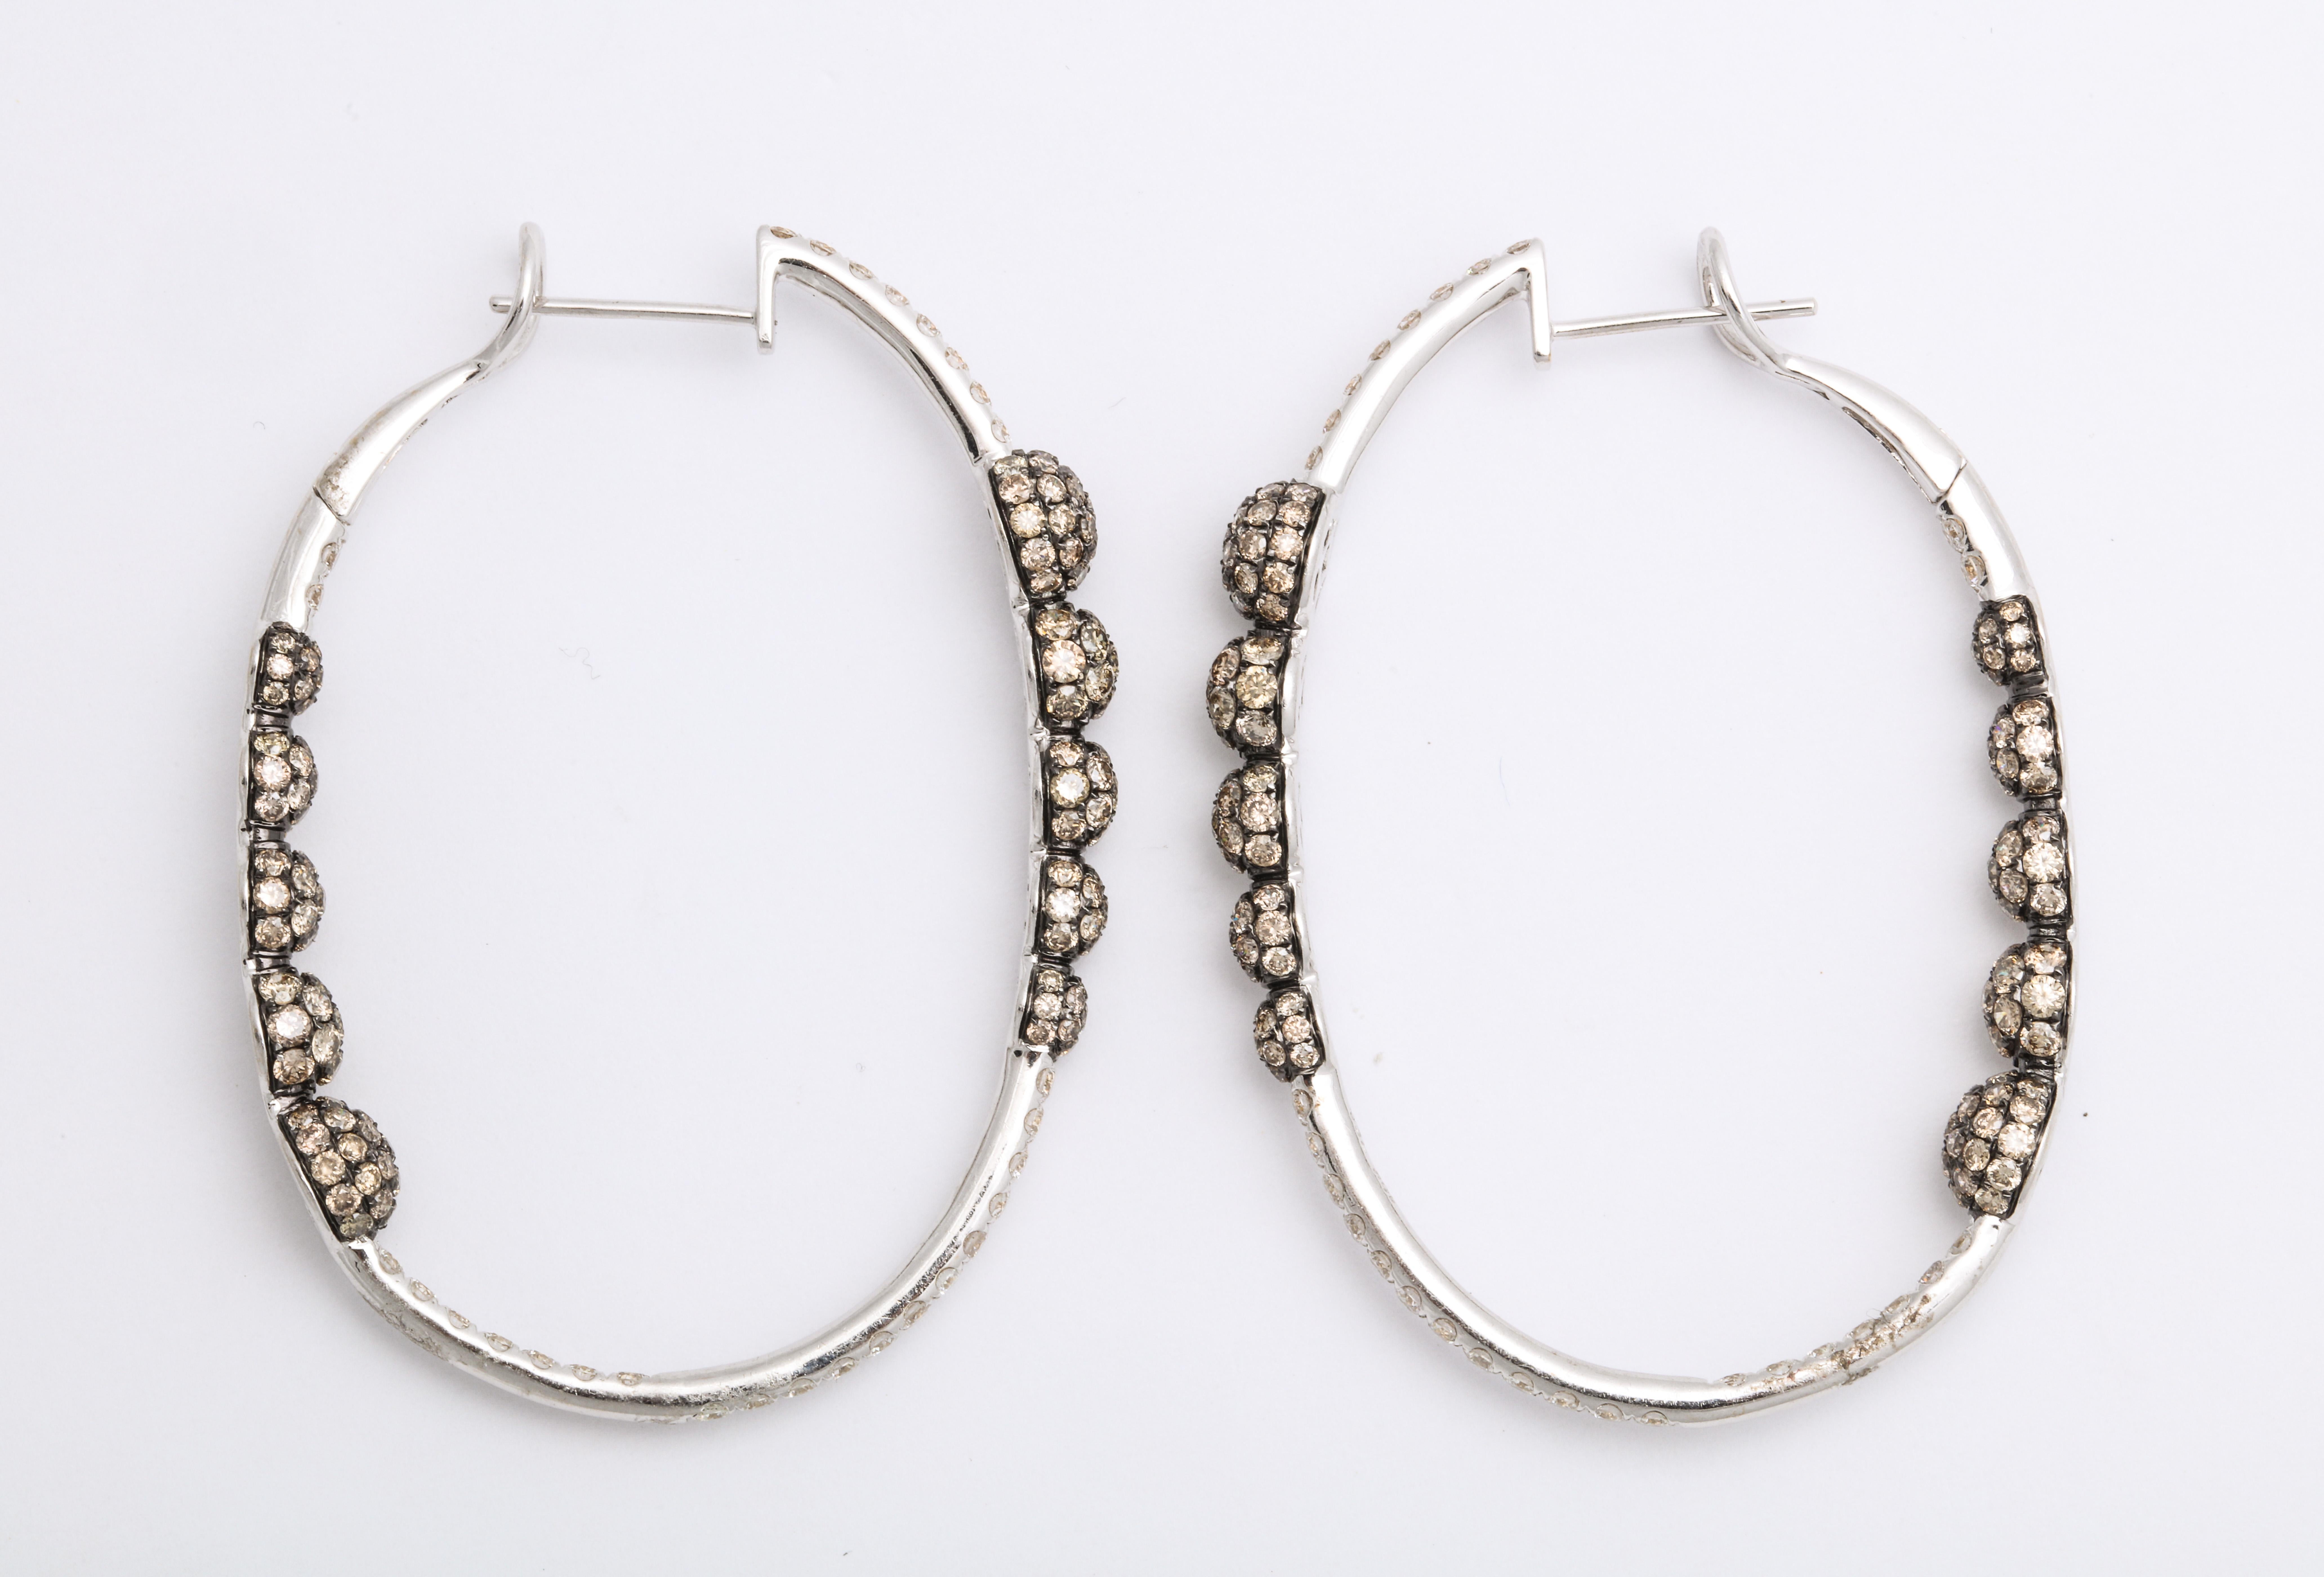 Oval 18K whole gold hoop earrings decorated with pave'-set round brilliant-cut colorless diamonds: 1.22 carats, mounted with gently graduating beads, decorated with natural cognac-color round brilliant-cut diamonds: 4.17 carats, with a black rhodium